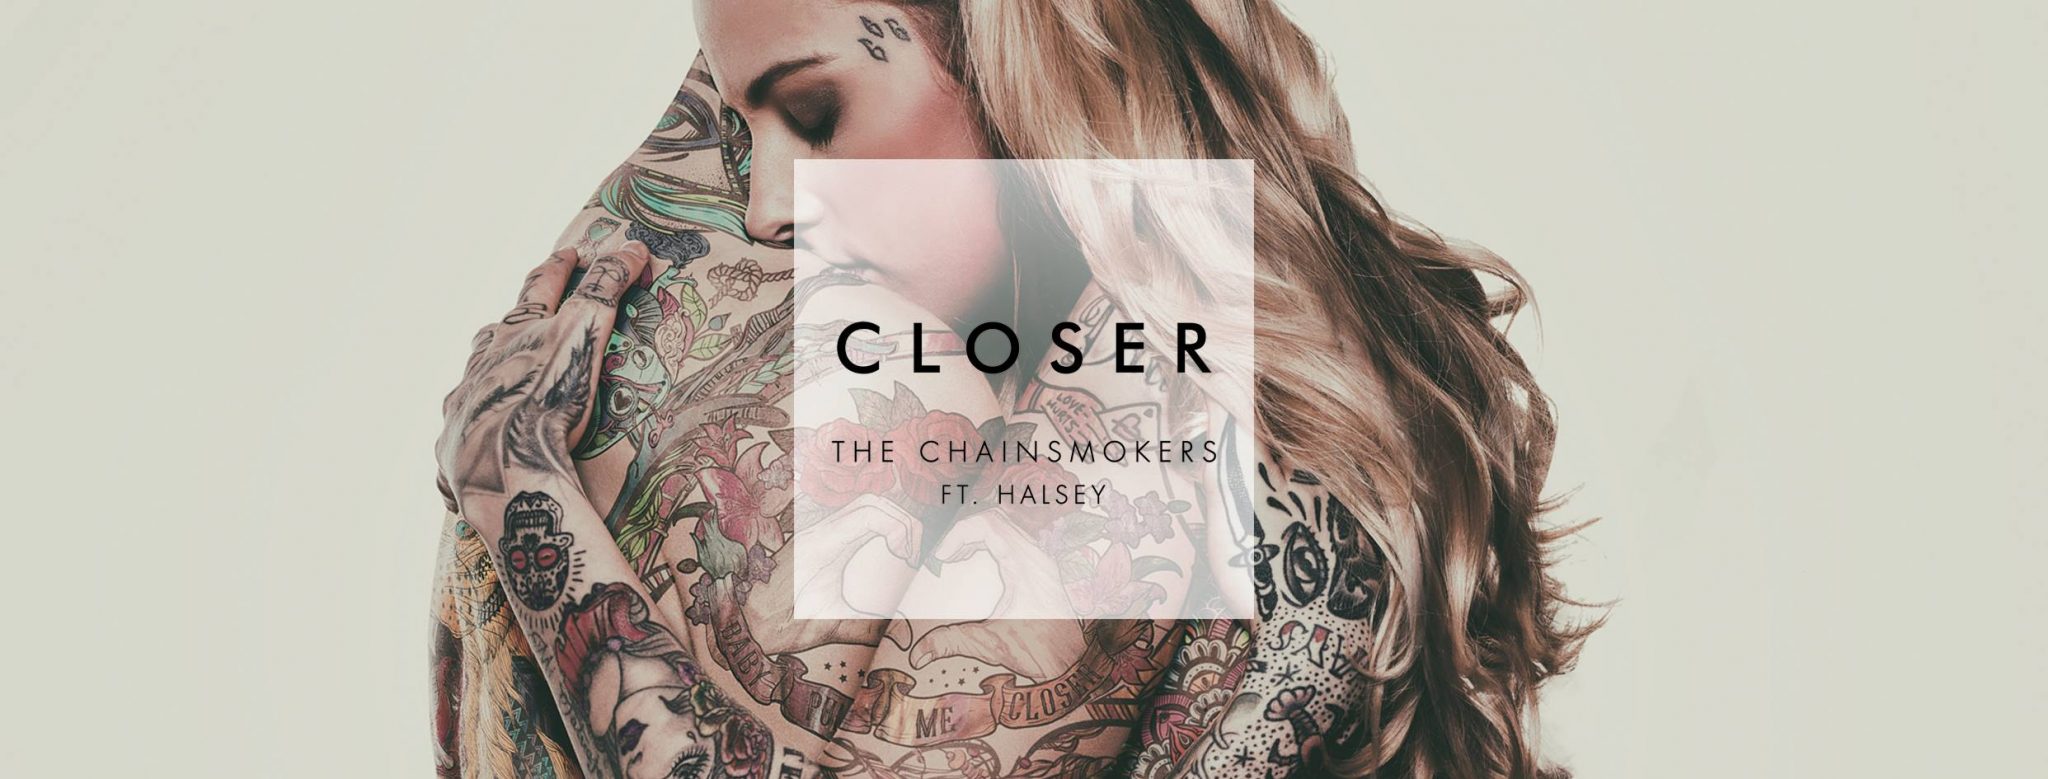 the chainsmokers-ft-halsey-closer-wolfinasuit-wolf in a suit